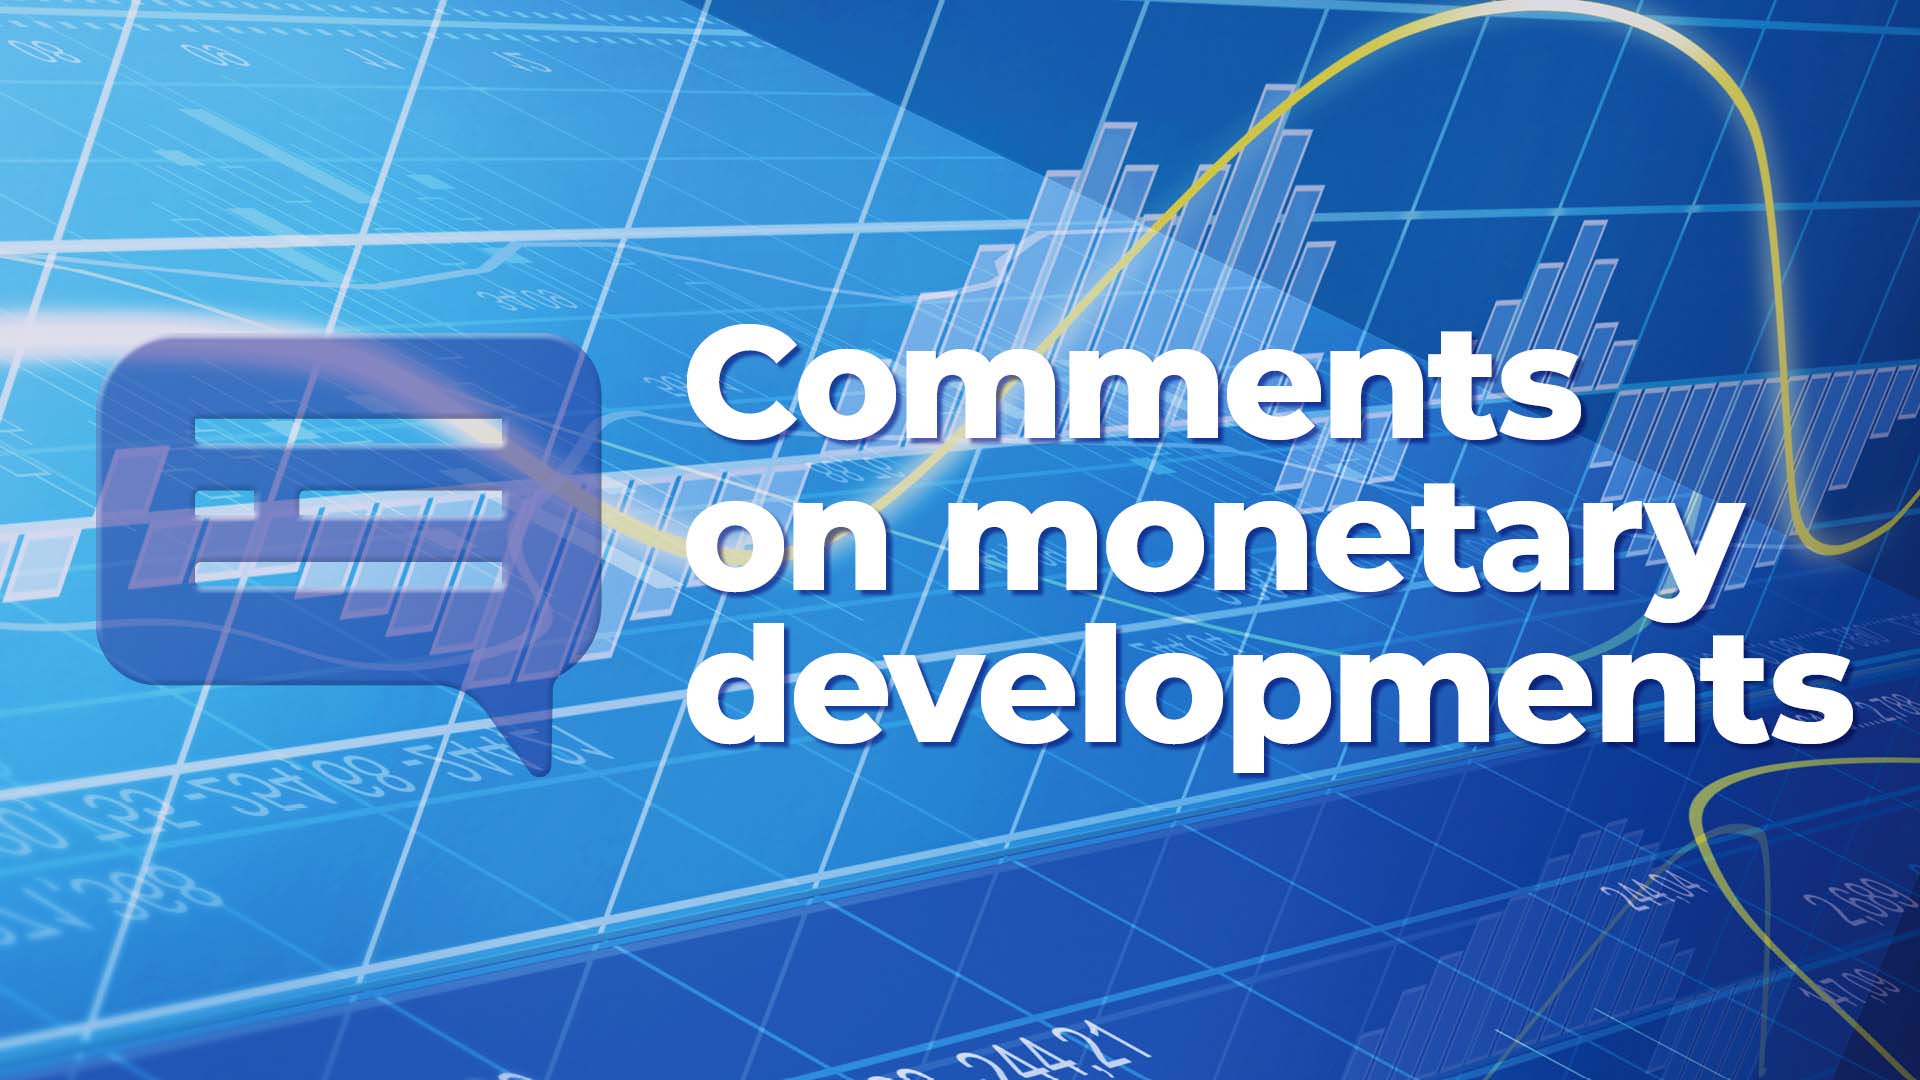 Comments on monetary developments for April 2022